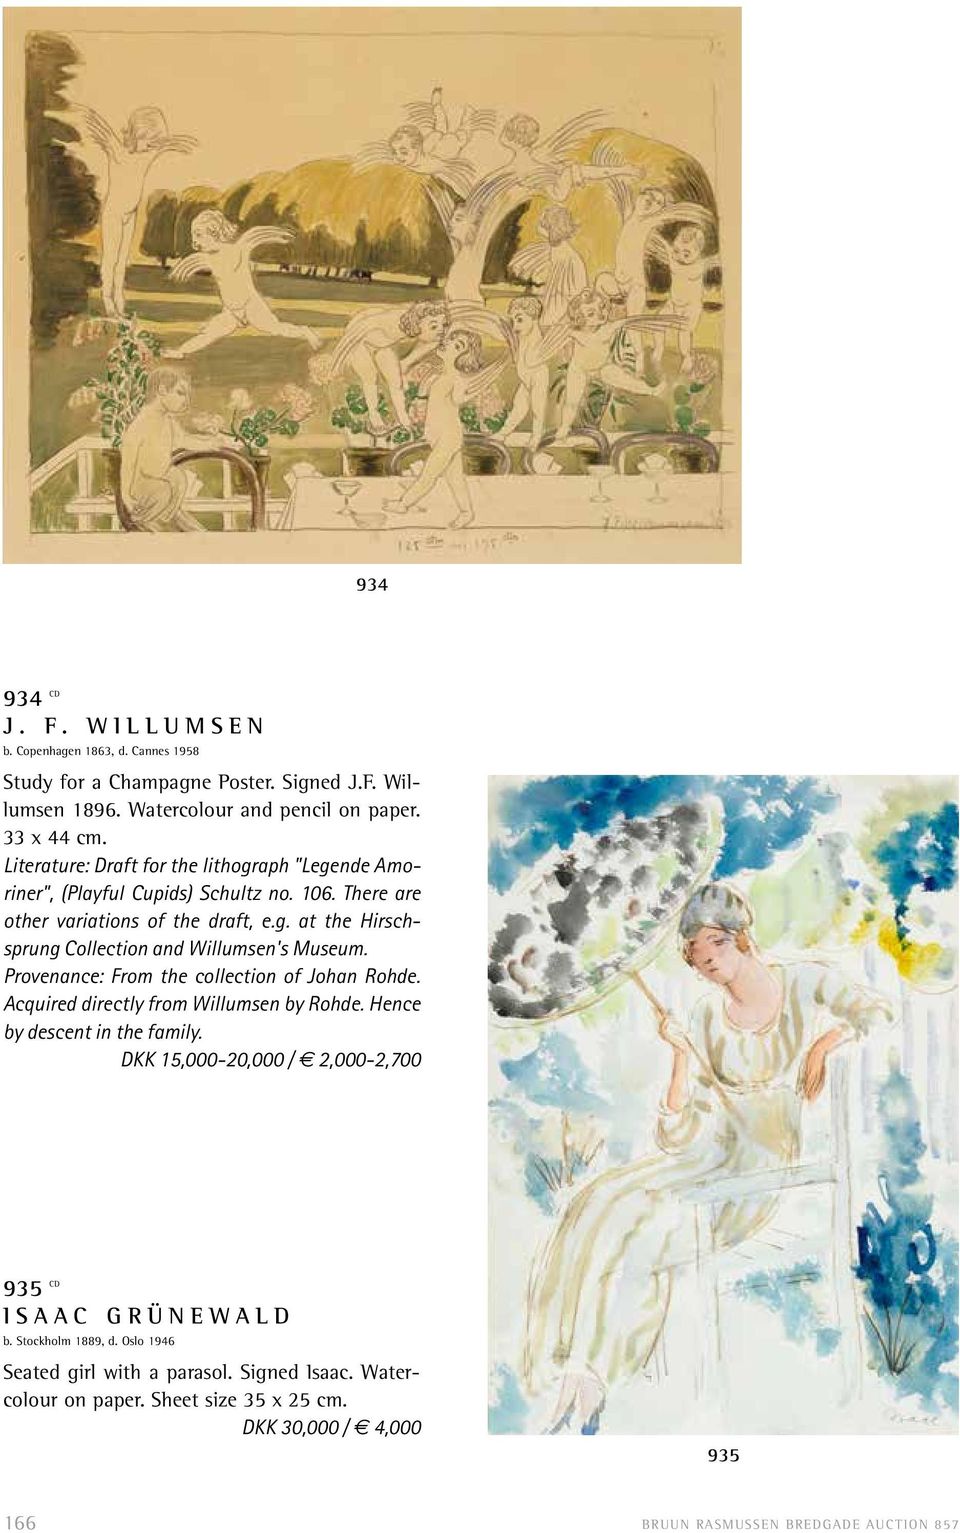 Provenance: From the collection of Johan Rohde. Acquired directly from Willumsen by Rohde. Hence by descent in the family. DKK 15,000-20,000 / 2,000-2,700 935 CD ISAAC GRÜNEWALD b.